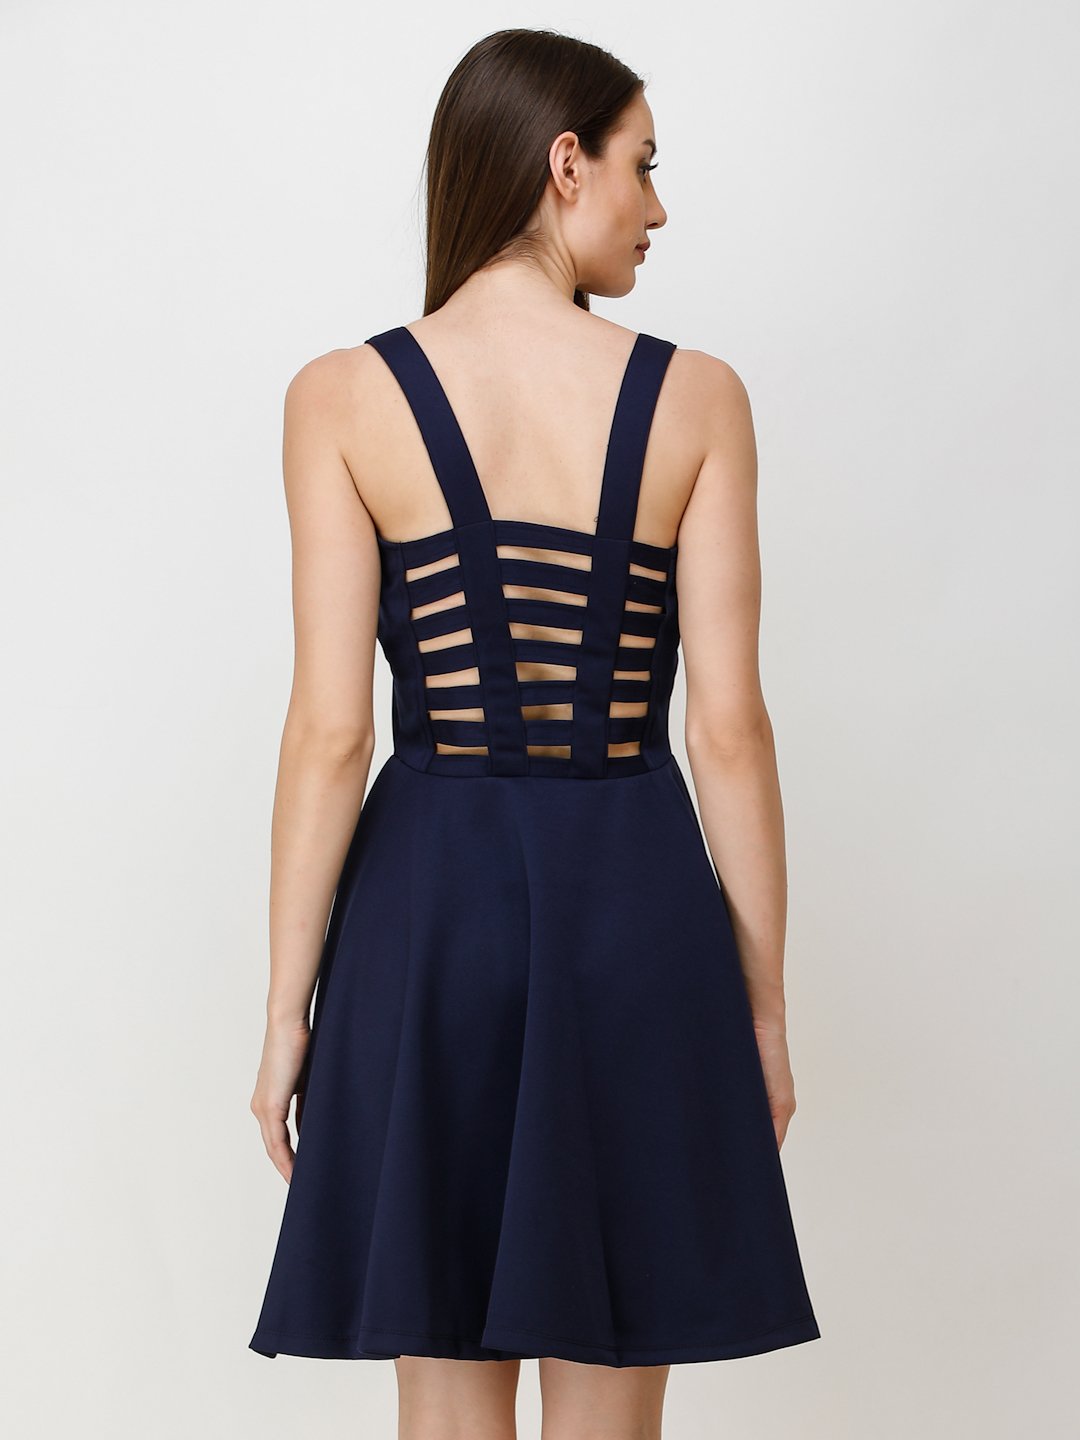 SCORPIUS NAVY STYLED BACK COCKTAIL DRESS